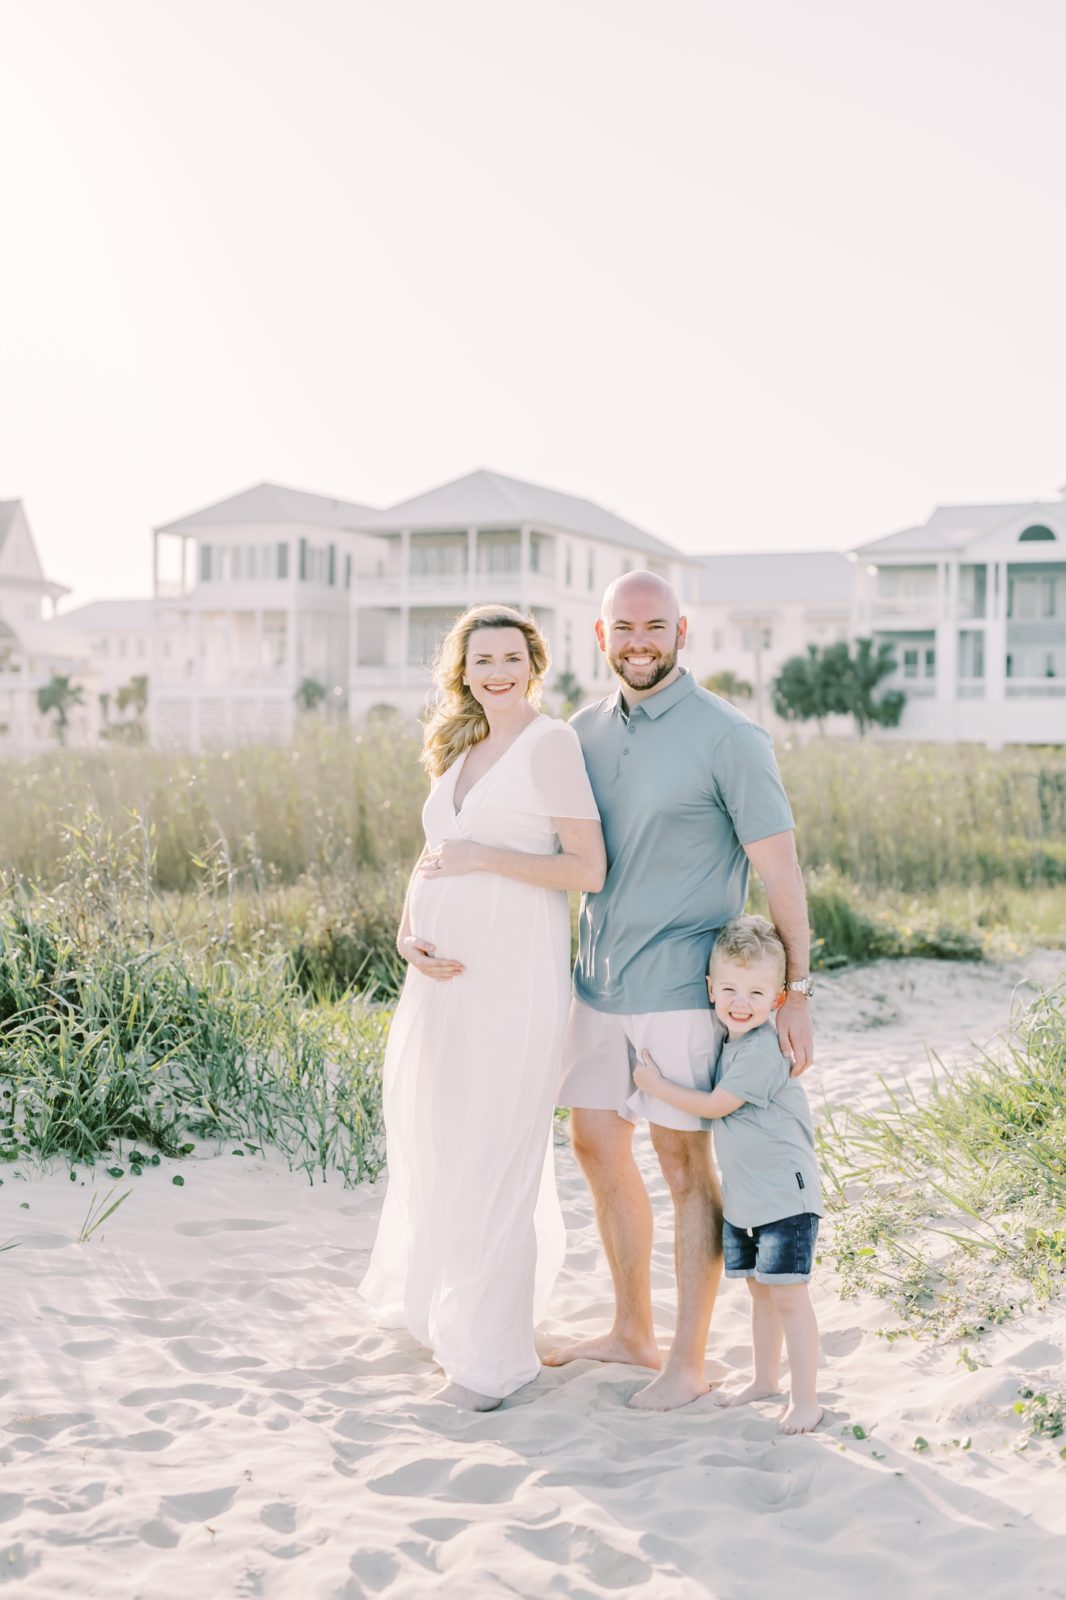 Family of three with a baby on the way at the beach captured by Christina Elliott Photography. family of three #ChristinaElliottPhotography #ChristinaElliottFamilies #GalvestonPhotography #Beachmaternityphotography #Texasfamilyphotographers